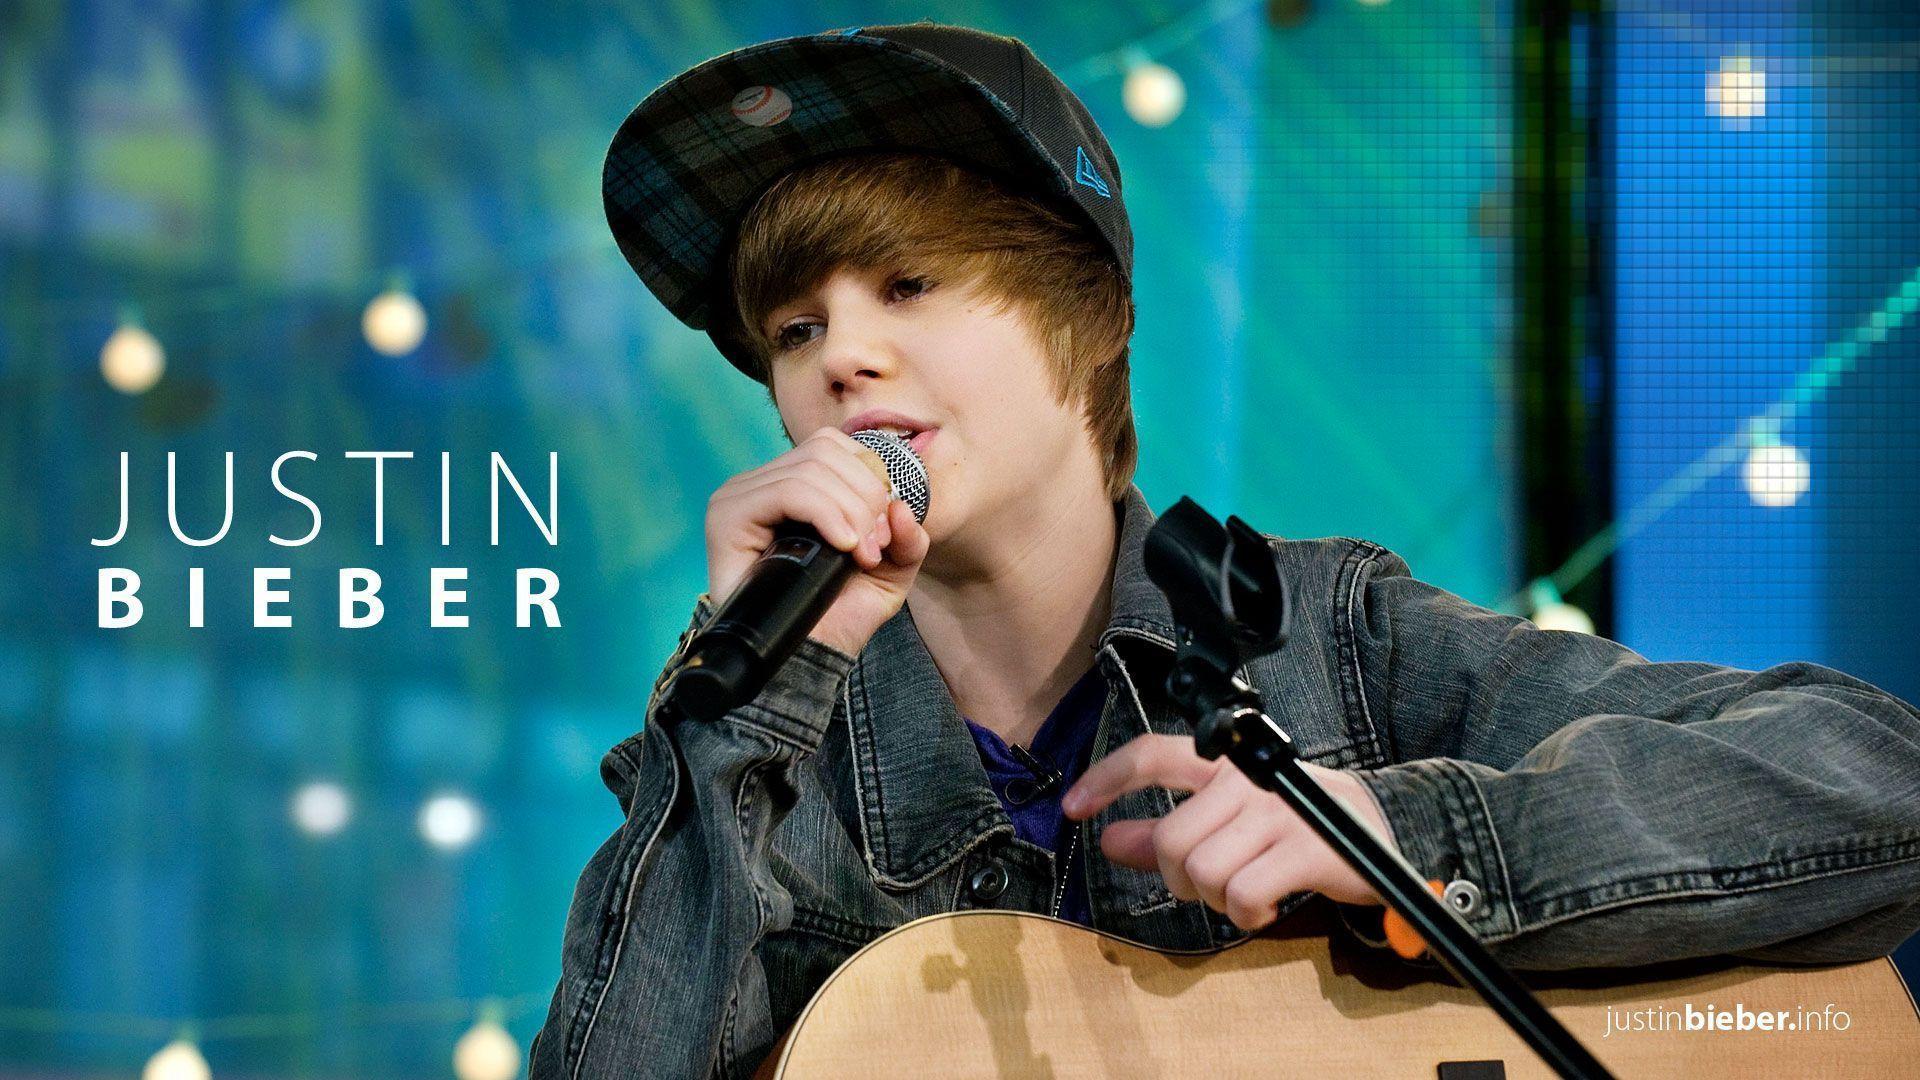 Justin Bieber Wallpaper and Picture